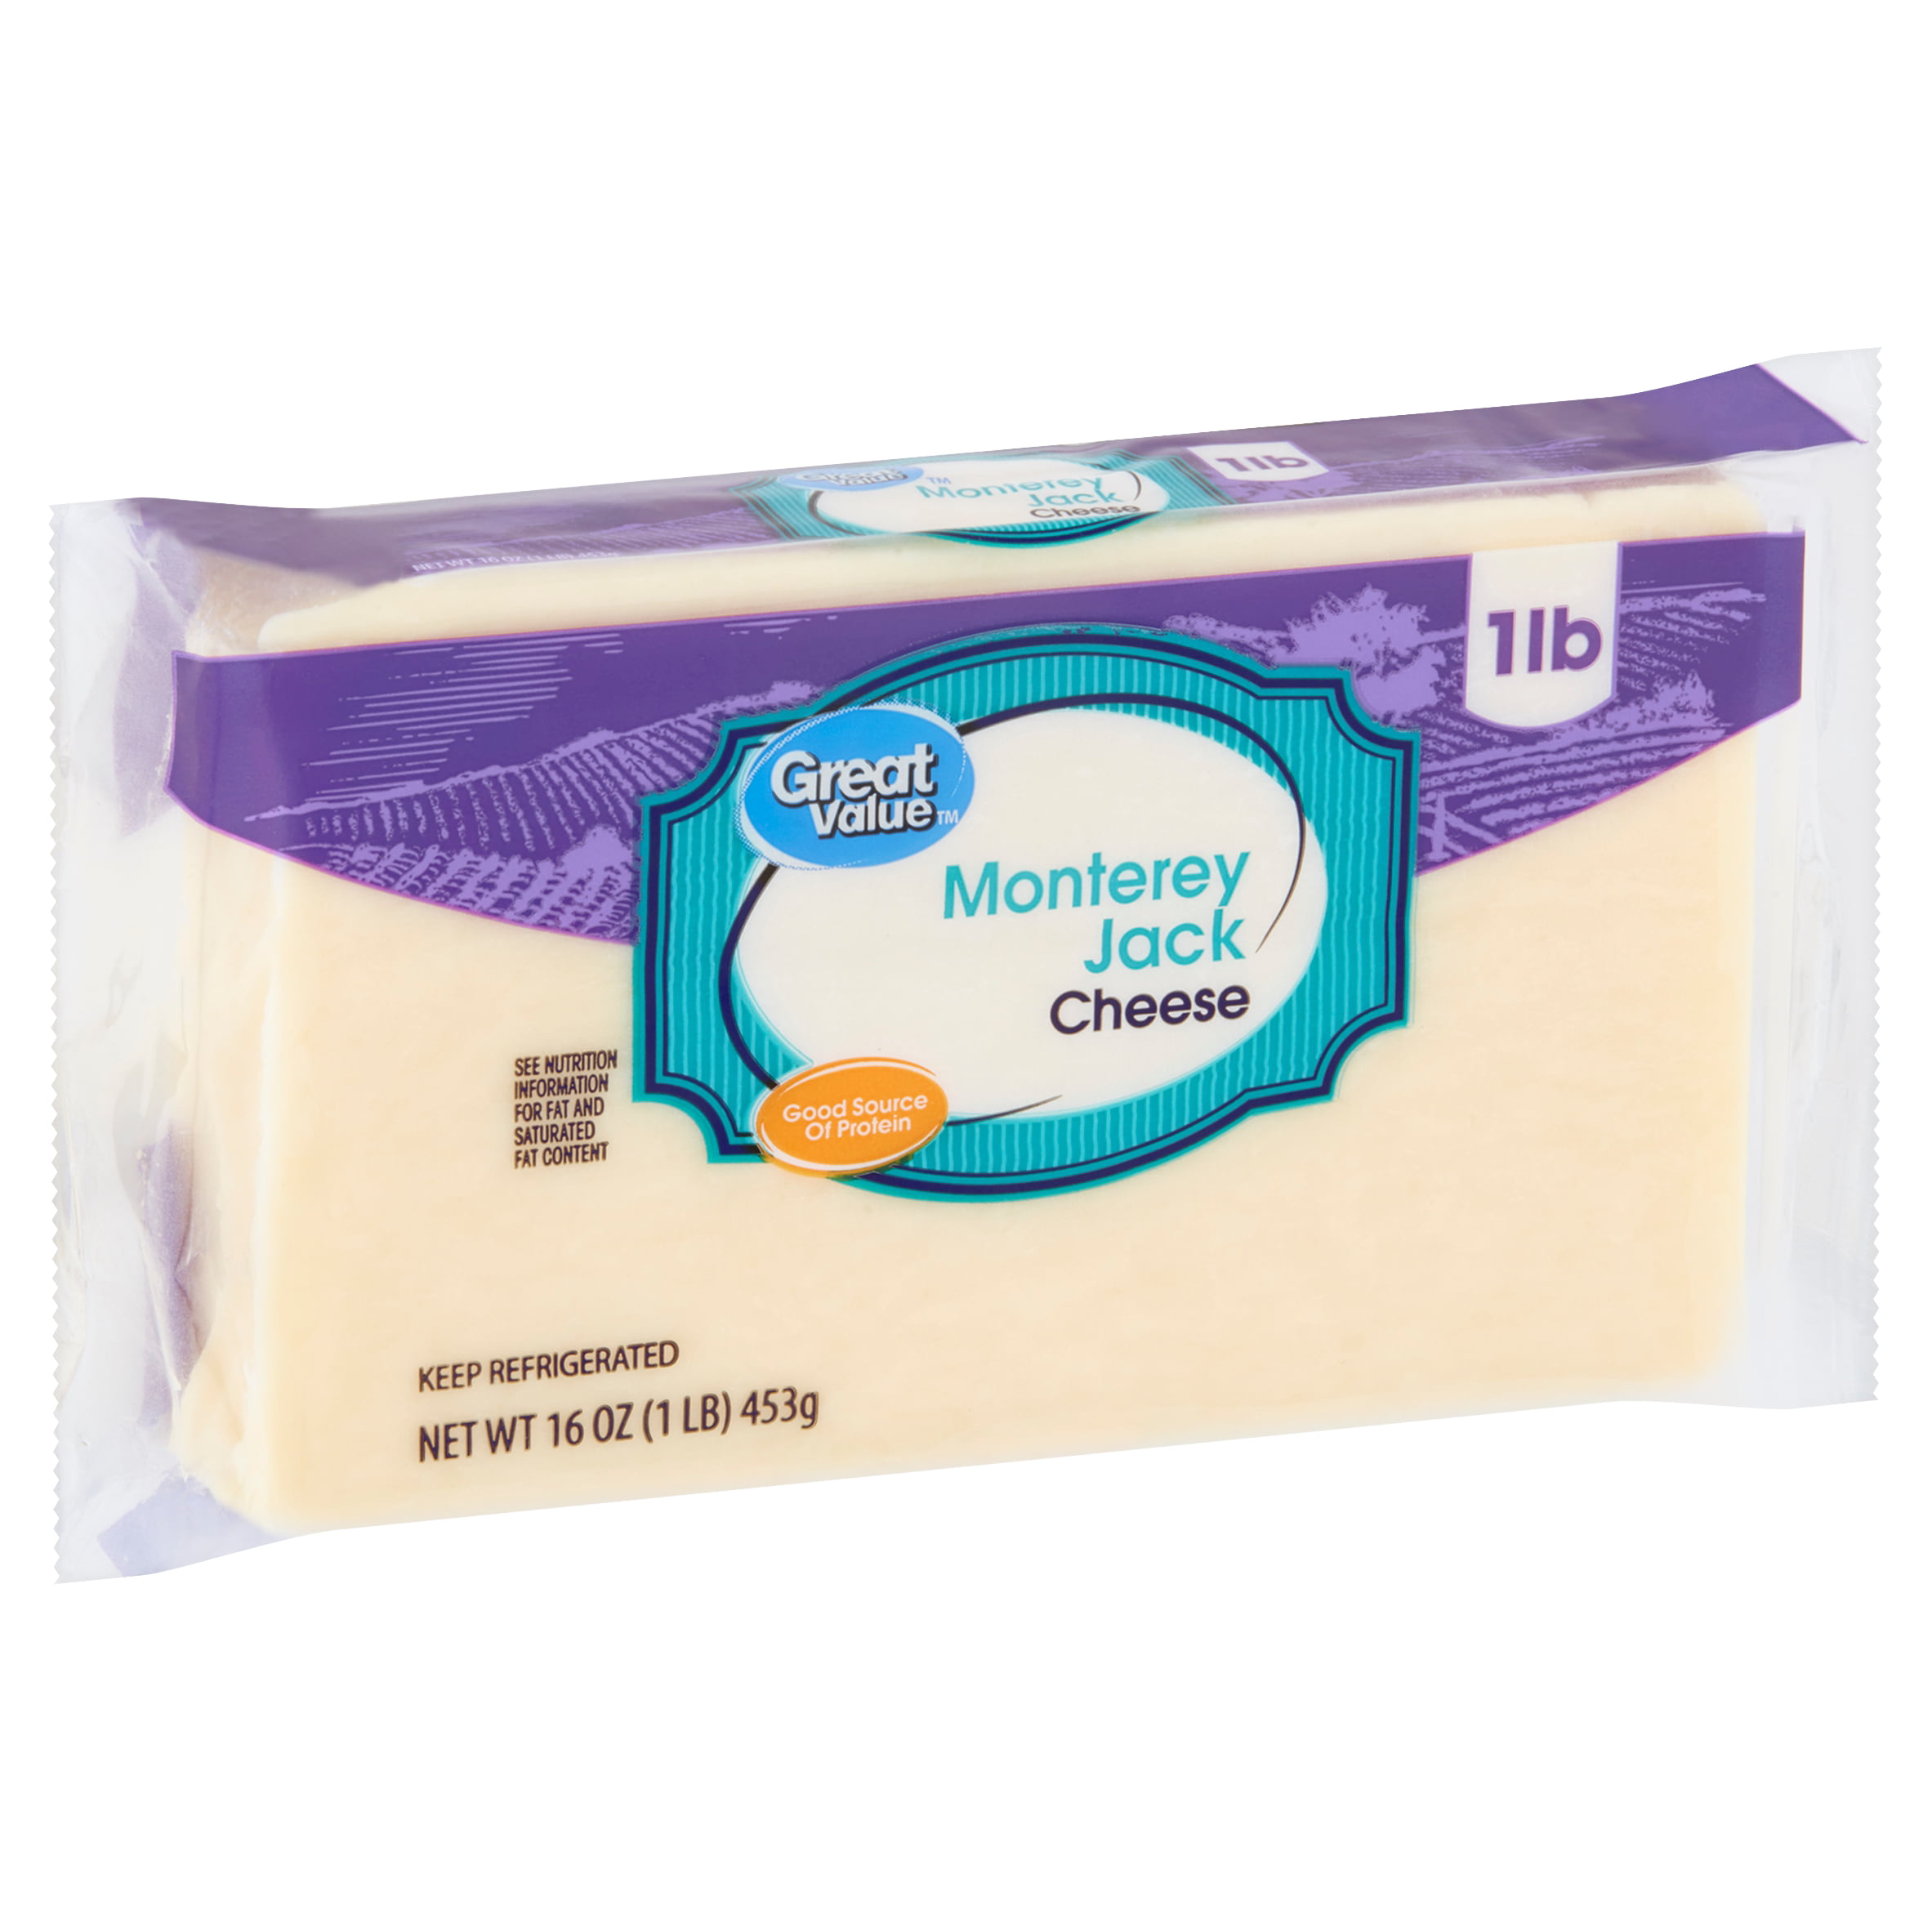 Great Value Monterey Jack Cheese, 16 oz